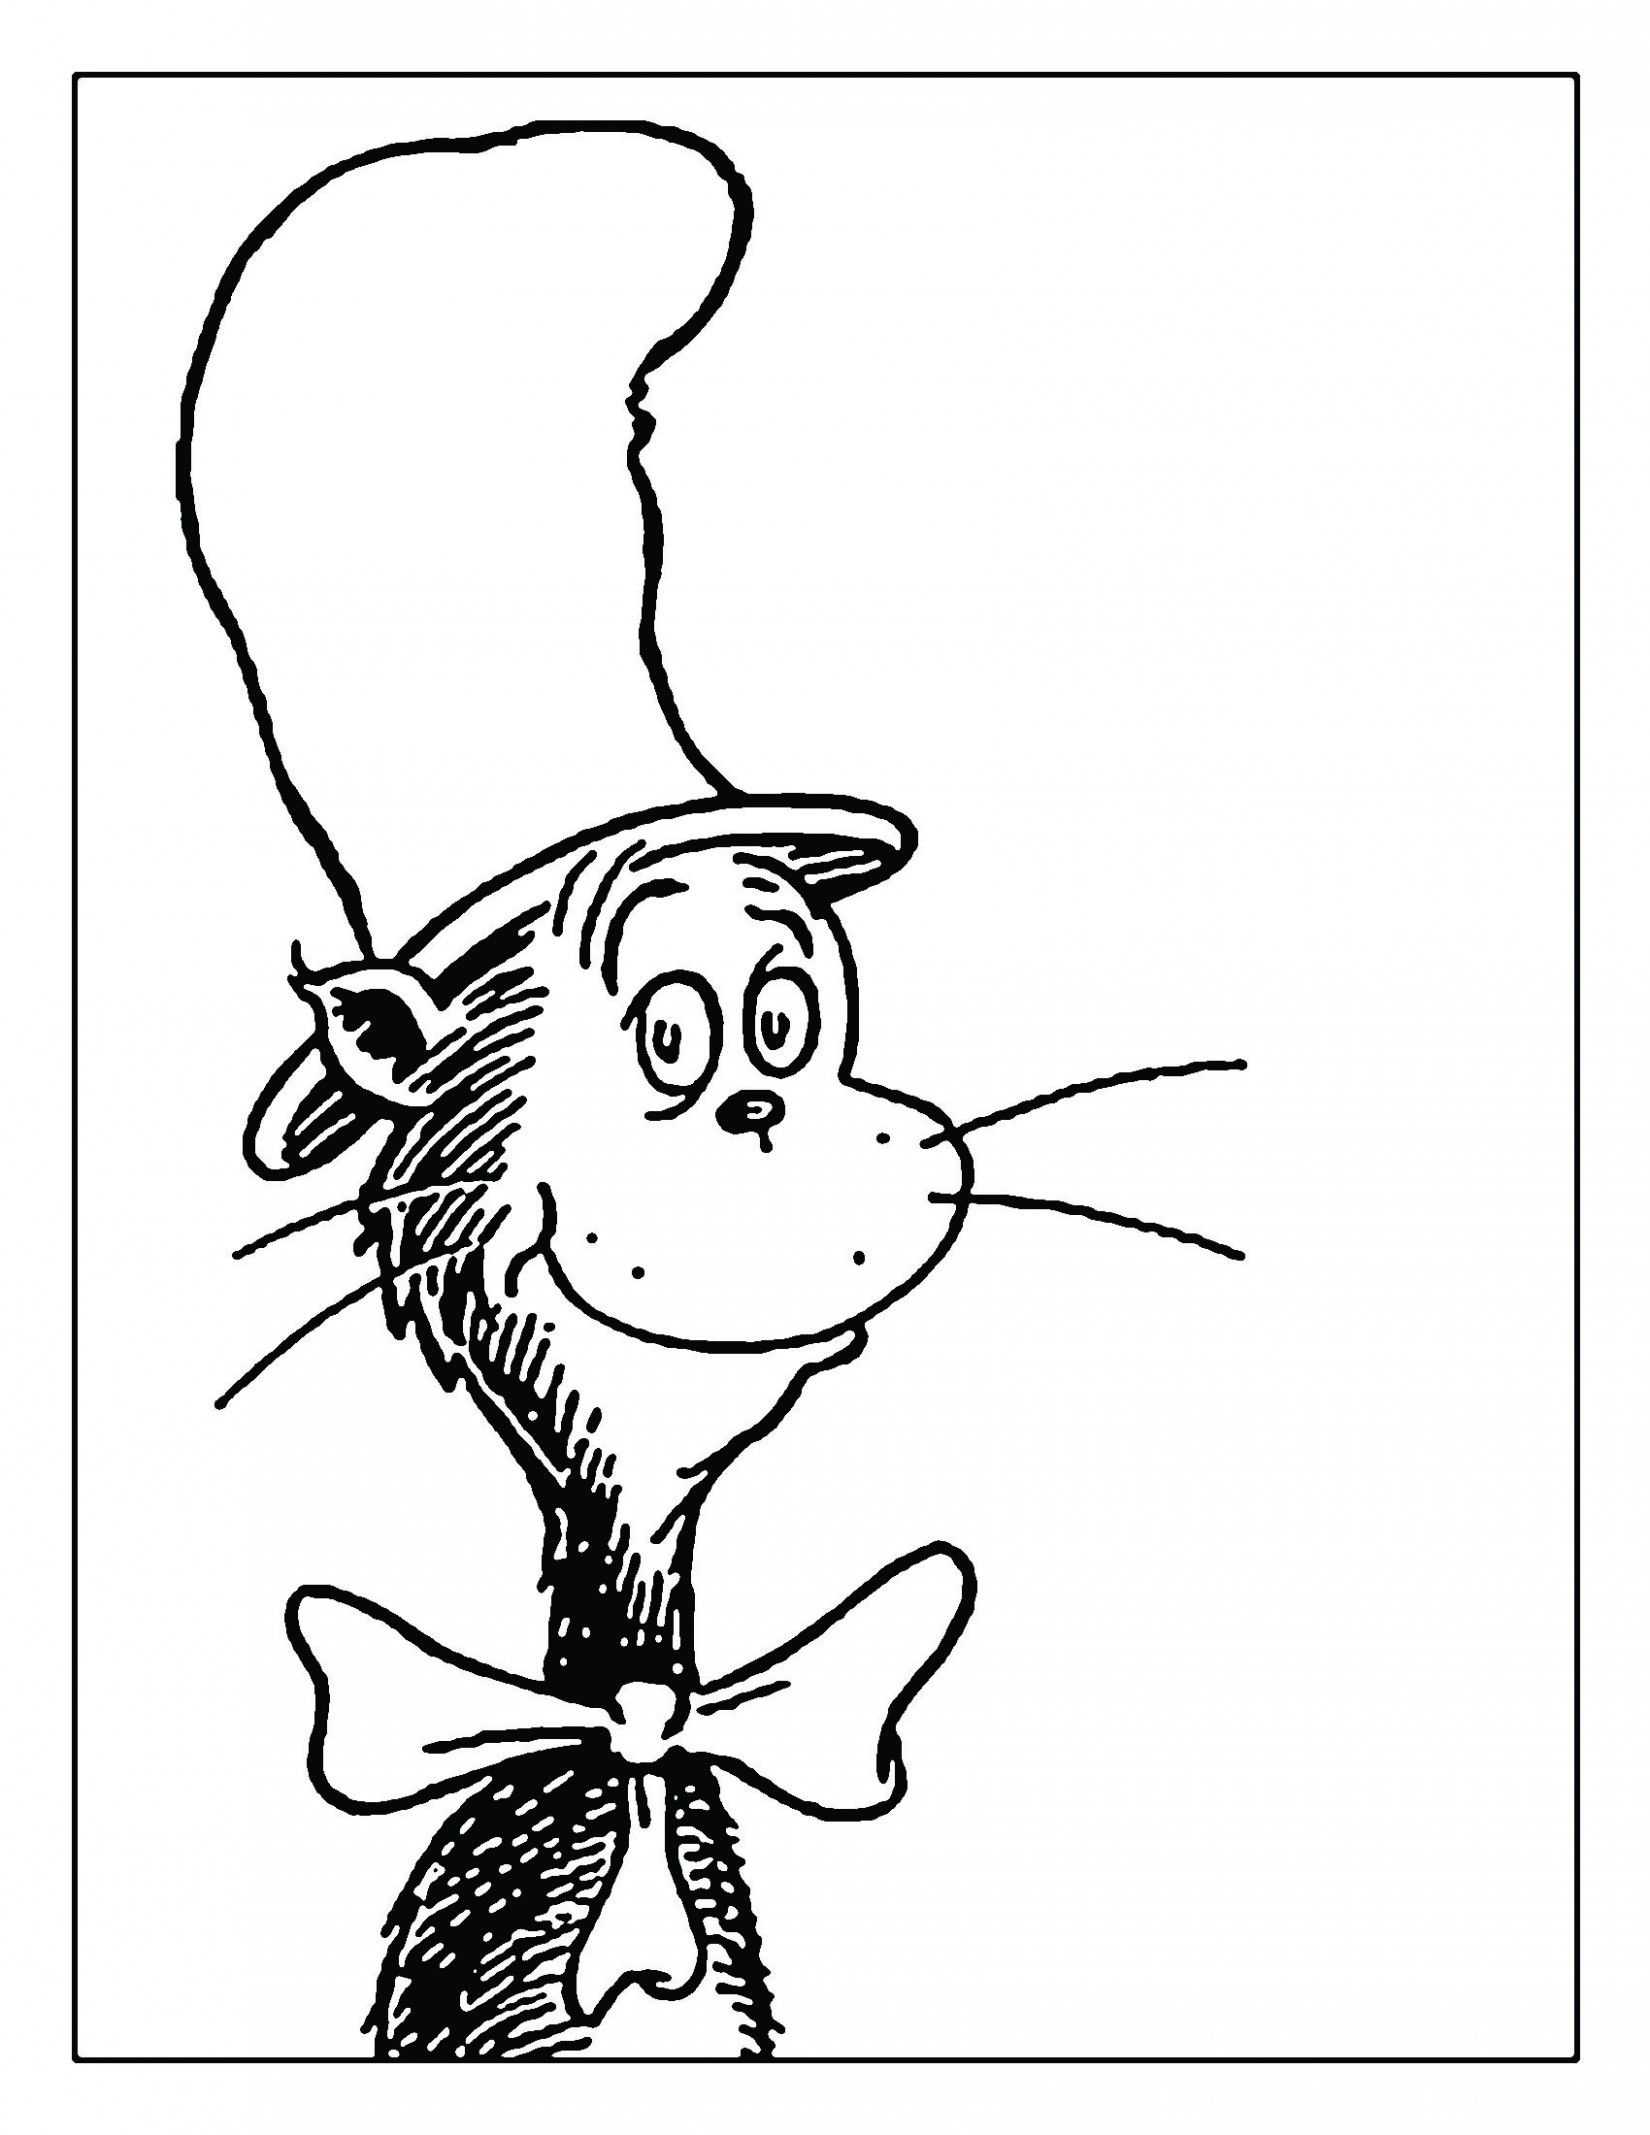 Dr. Seuss Cat In The Hat | Dr Seuss Coloring Pages, Dr Seuss Within Blank Cat In The Hat Template